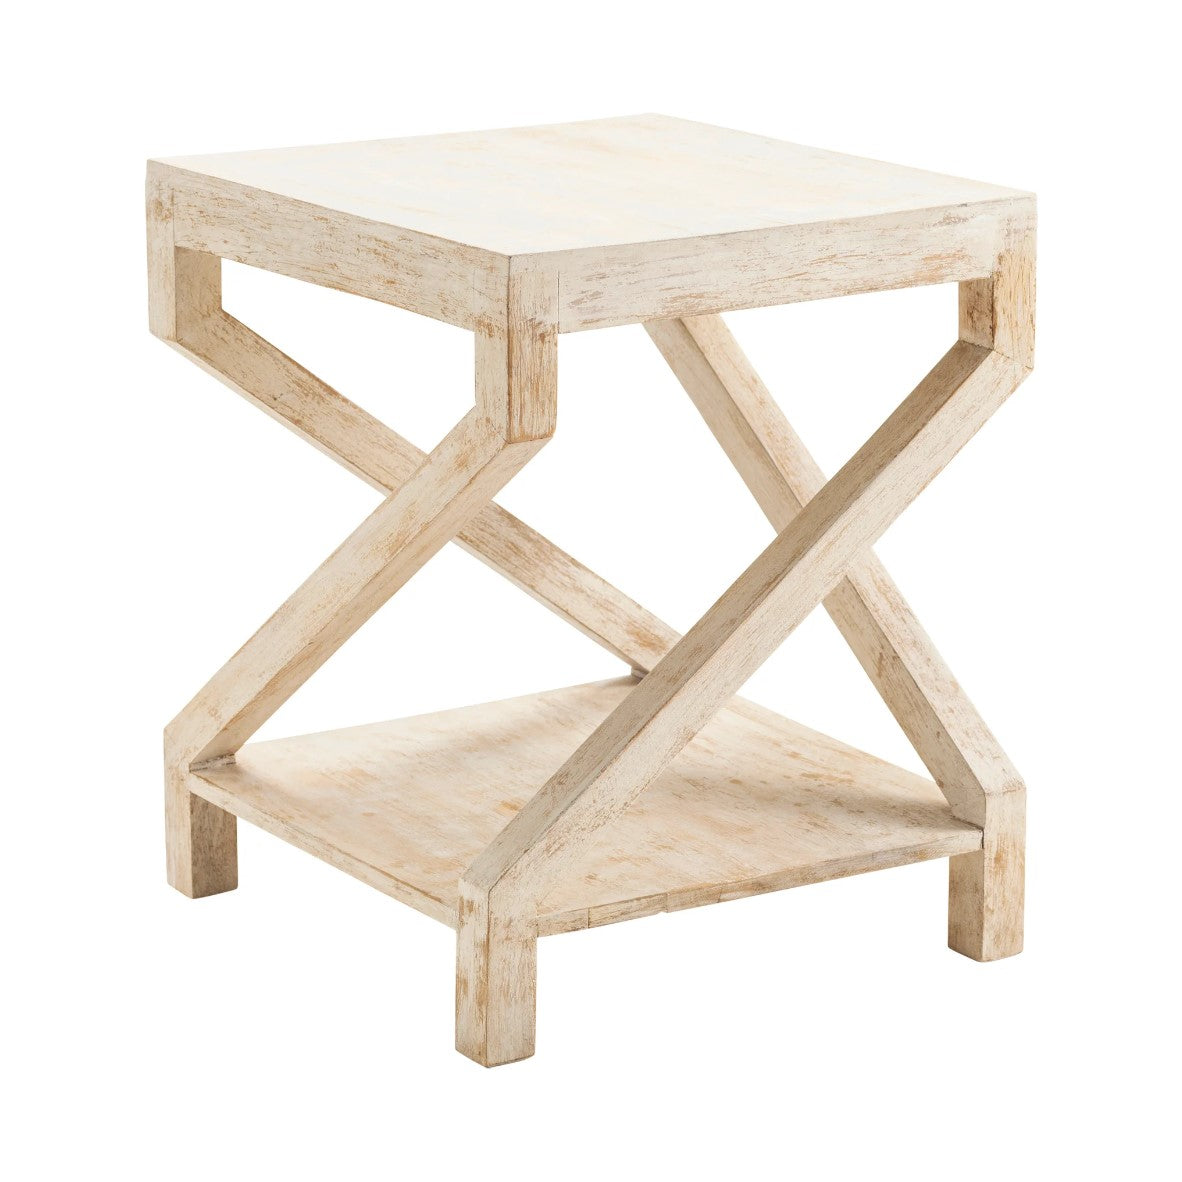 Crestview Collection Amelia 18" x 18" x 22" Rustic Wood Accent Table In Distressed White Finish